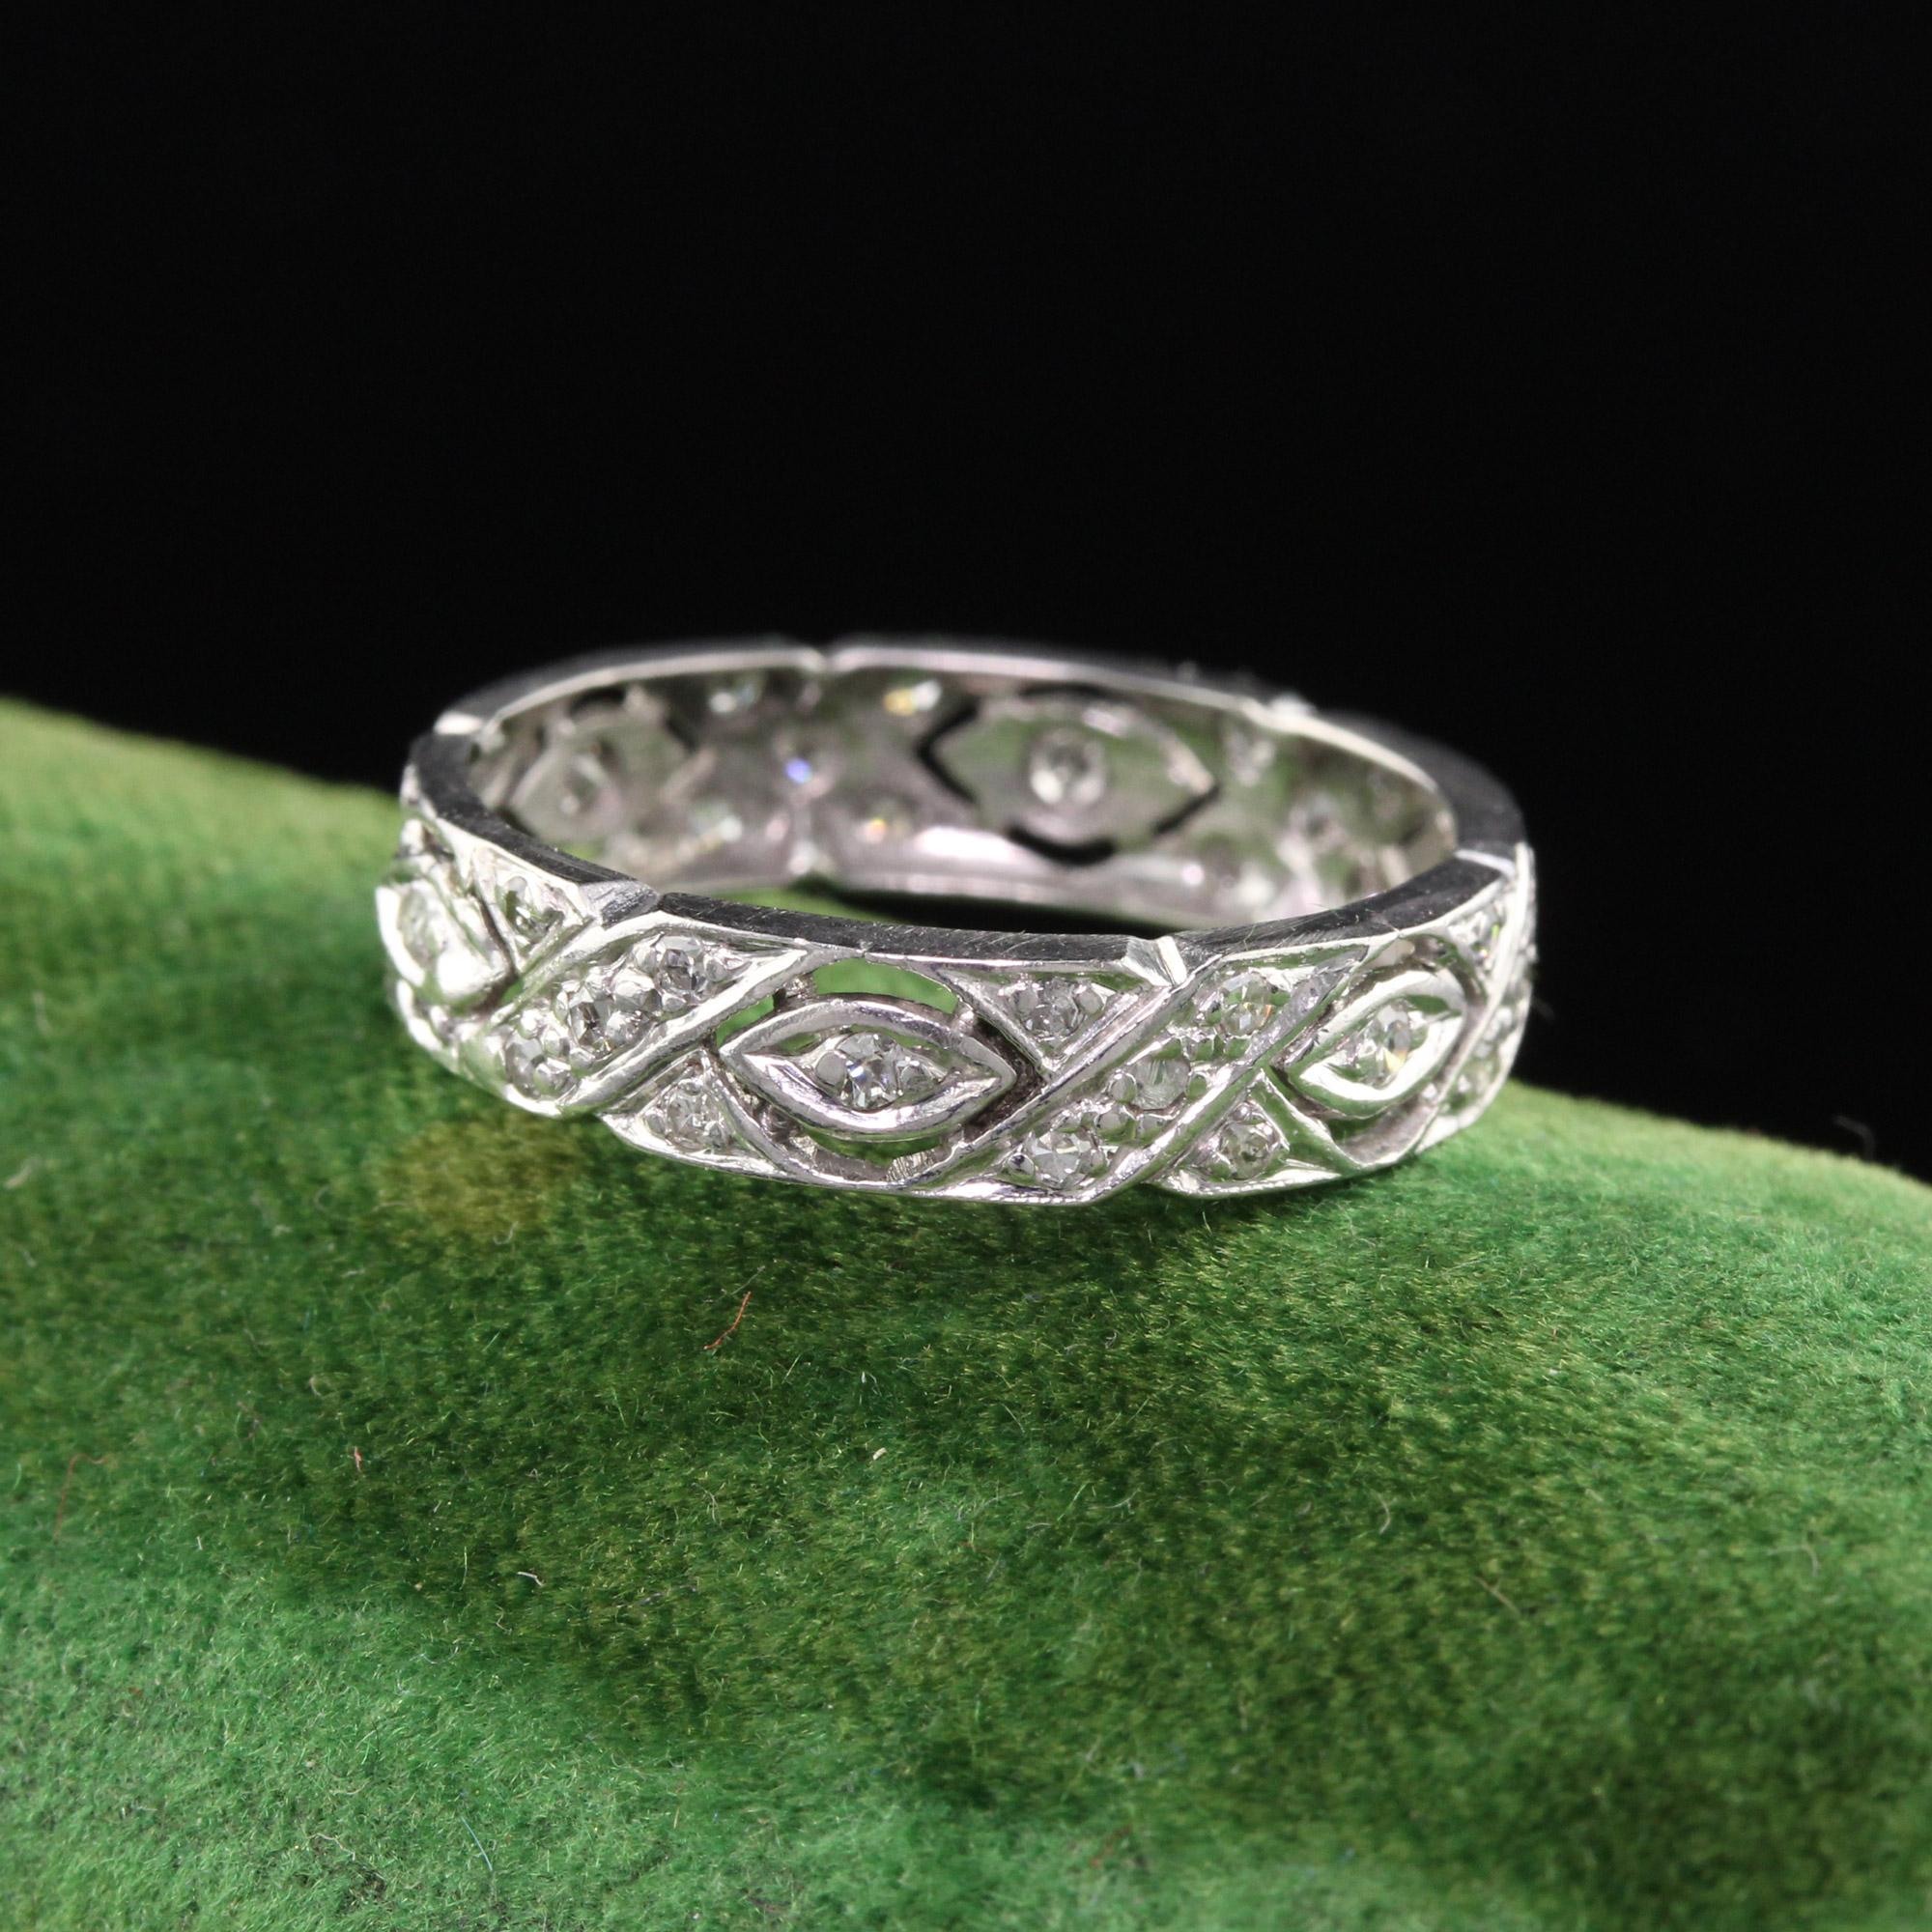 This is a gorgeous Art Deco Platinum Diamond Filigree Wedding Band. It is beautifully hand made and looks amazing on the finger. The design features alternating 'X' and marquise shapes.

#R0171

Metal: Platinum

Weight: 2.7 Grams

Total Diamond